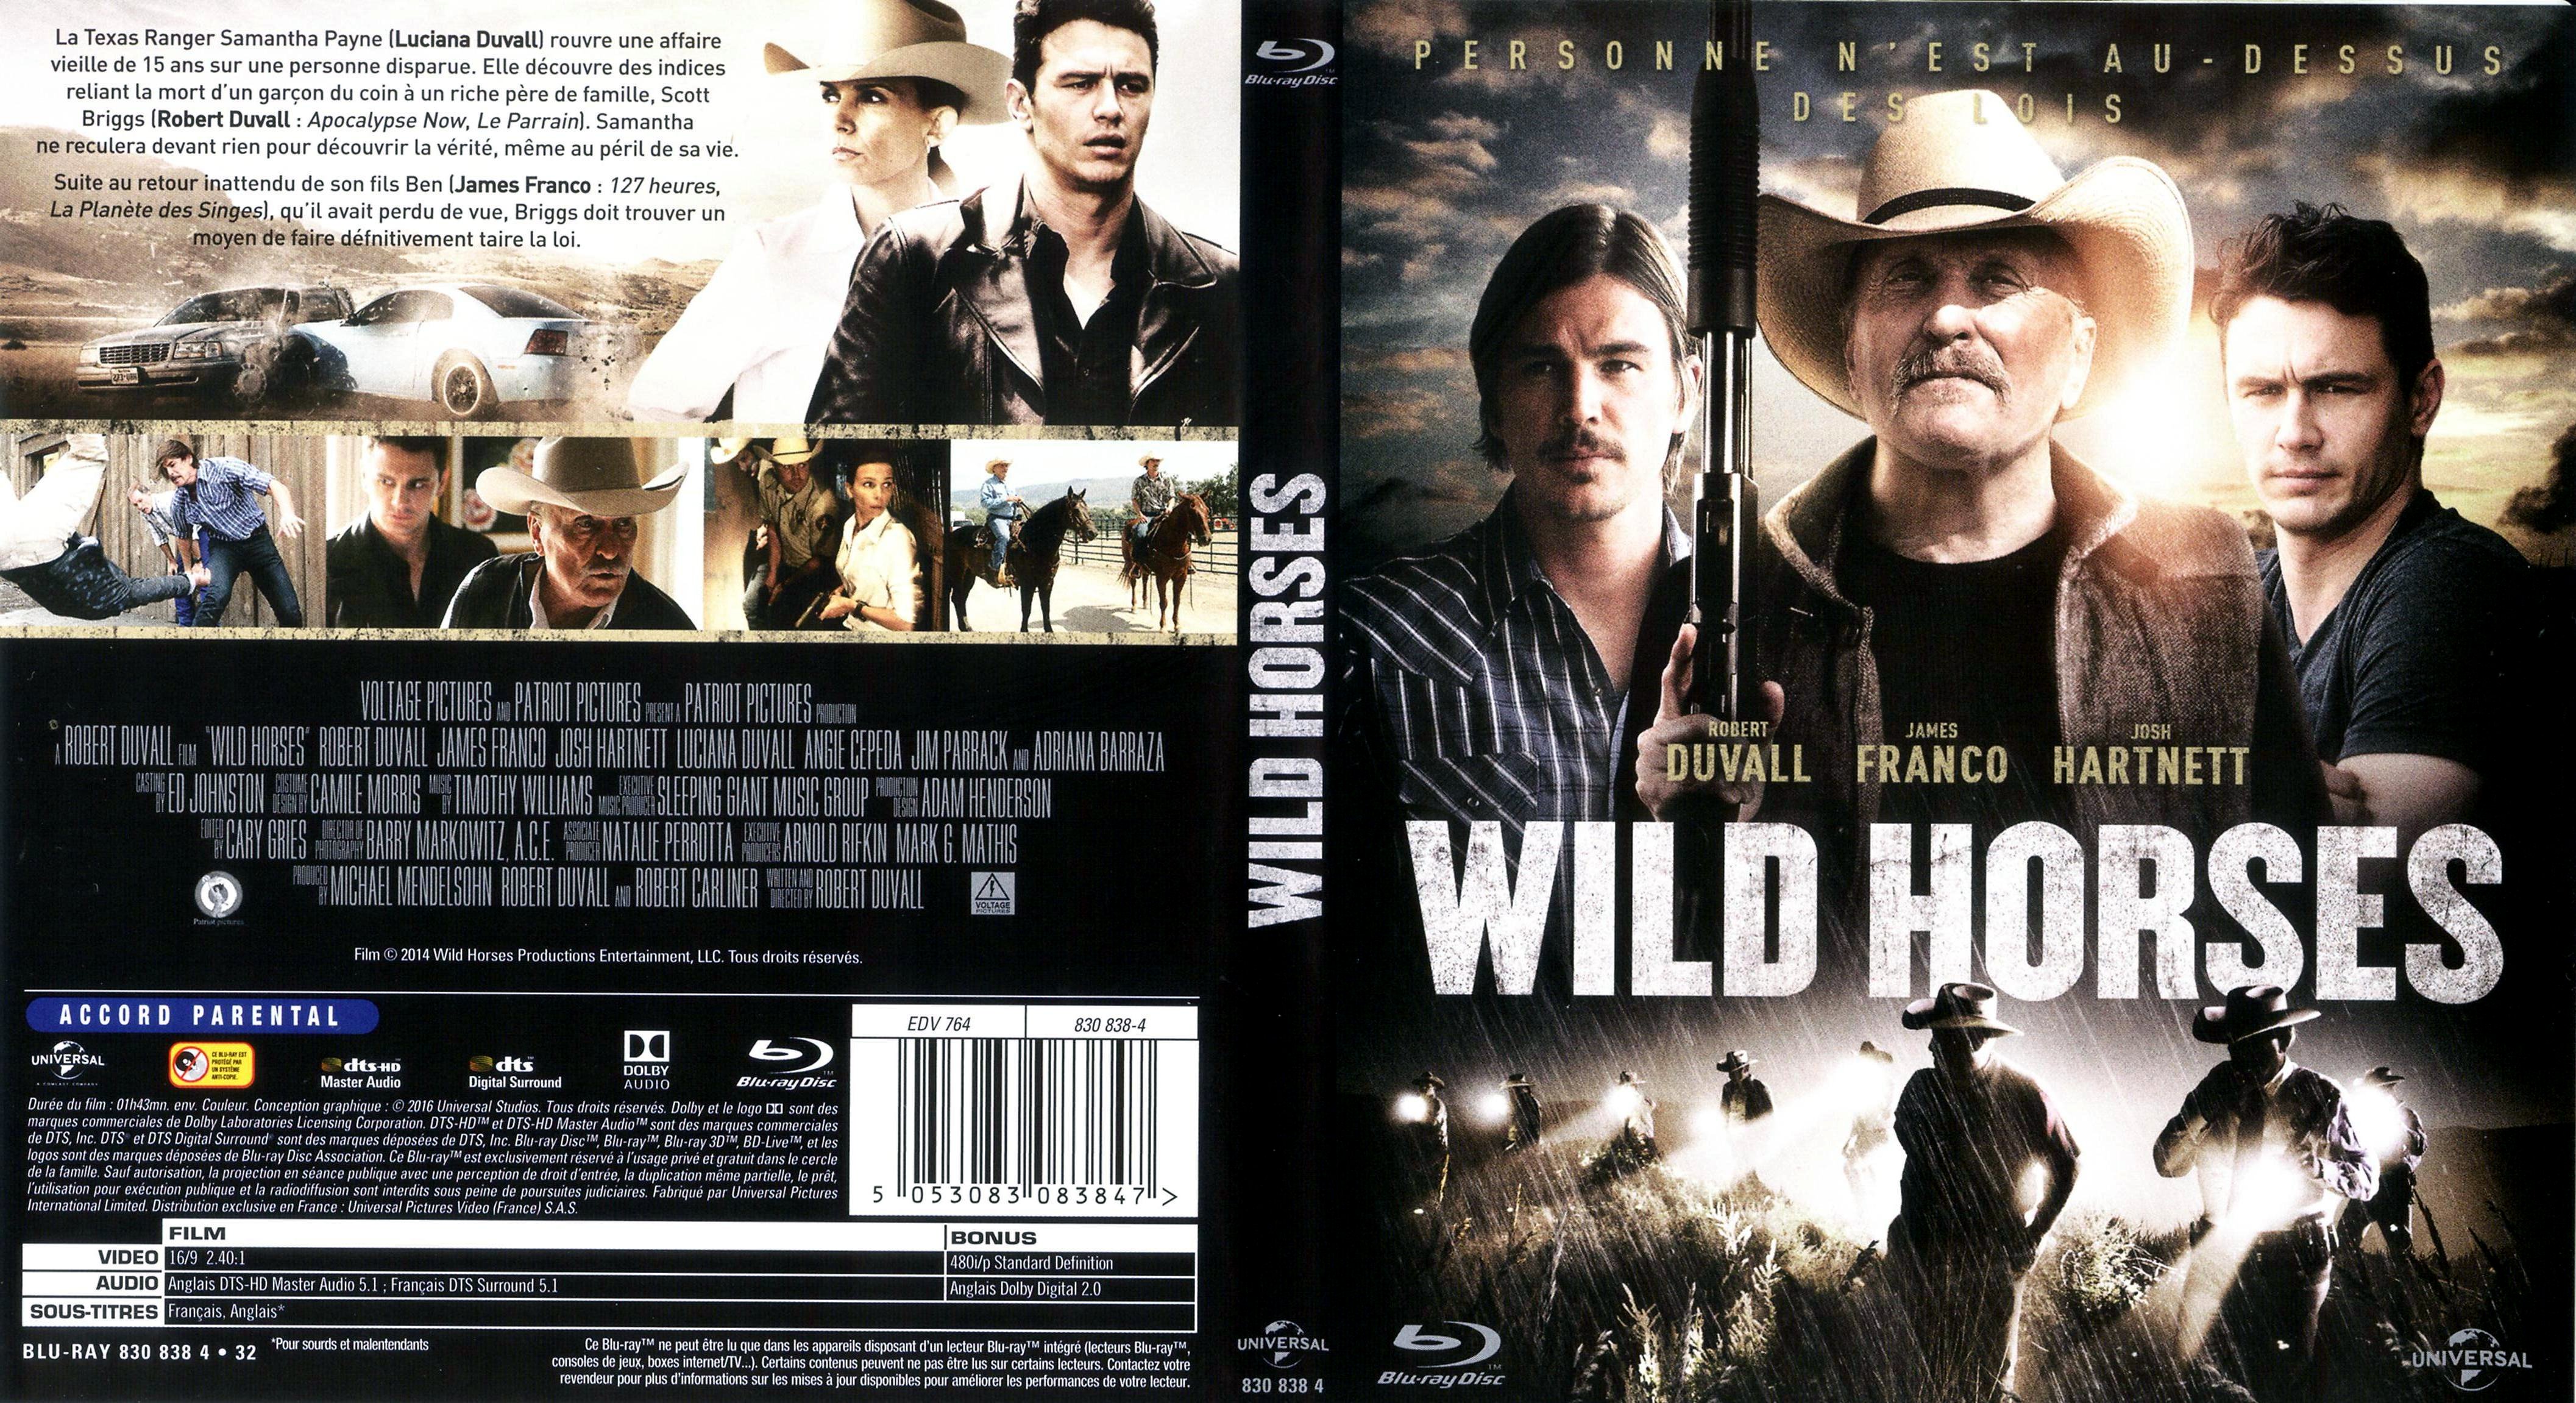 Jaquette DVD Wild horses (BLU-RAY)